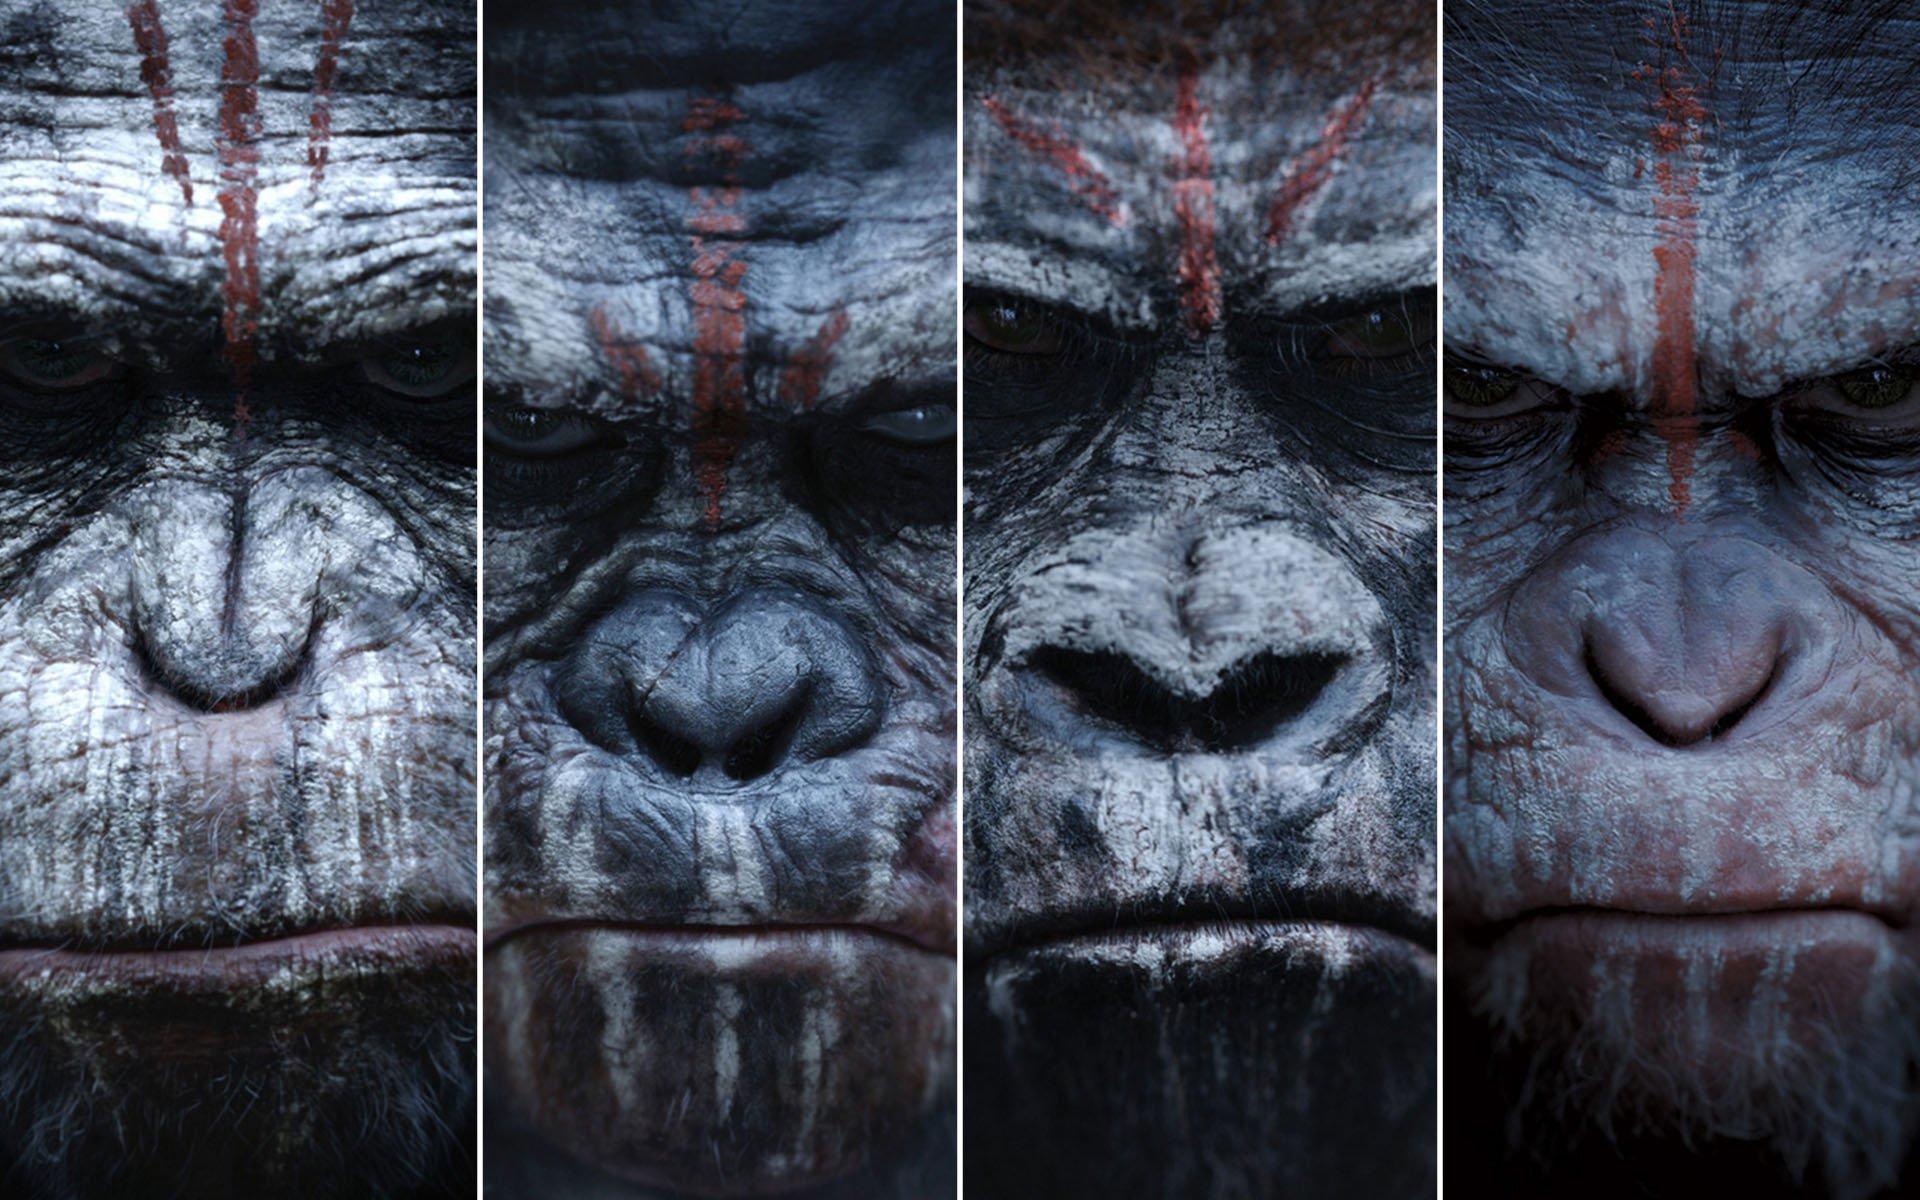 dawn of the apes, Action, Drama, Sci fi, Dawn, Planet, Apes